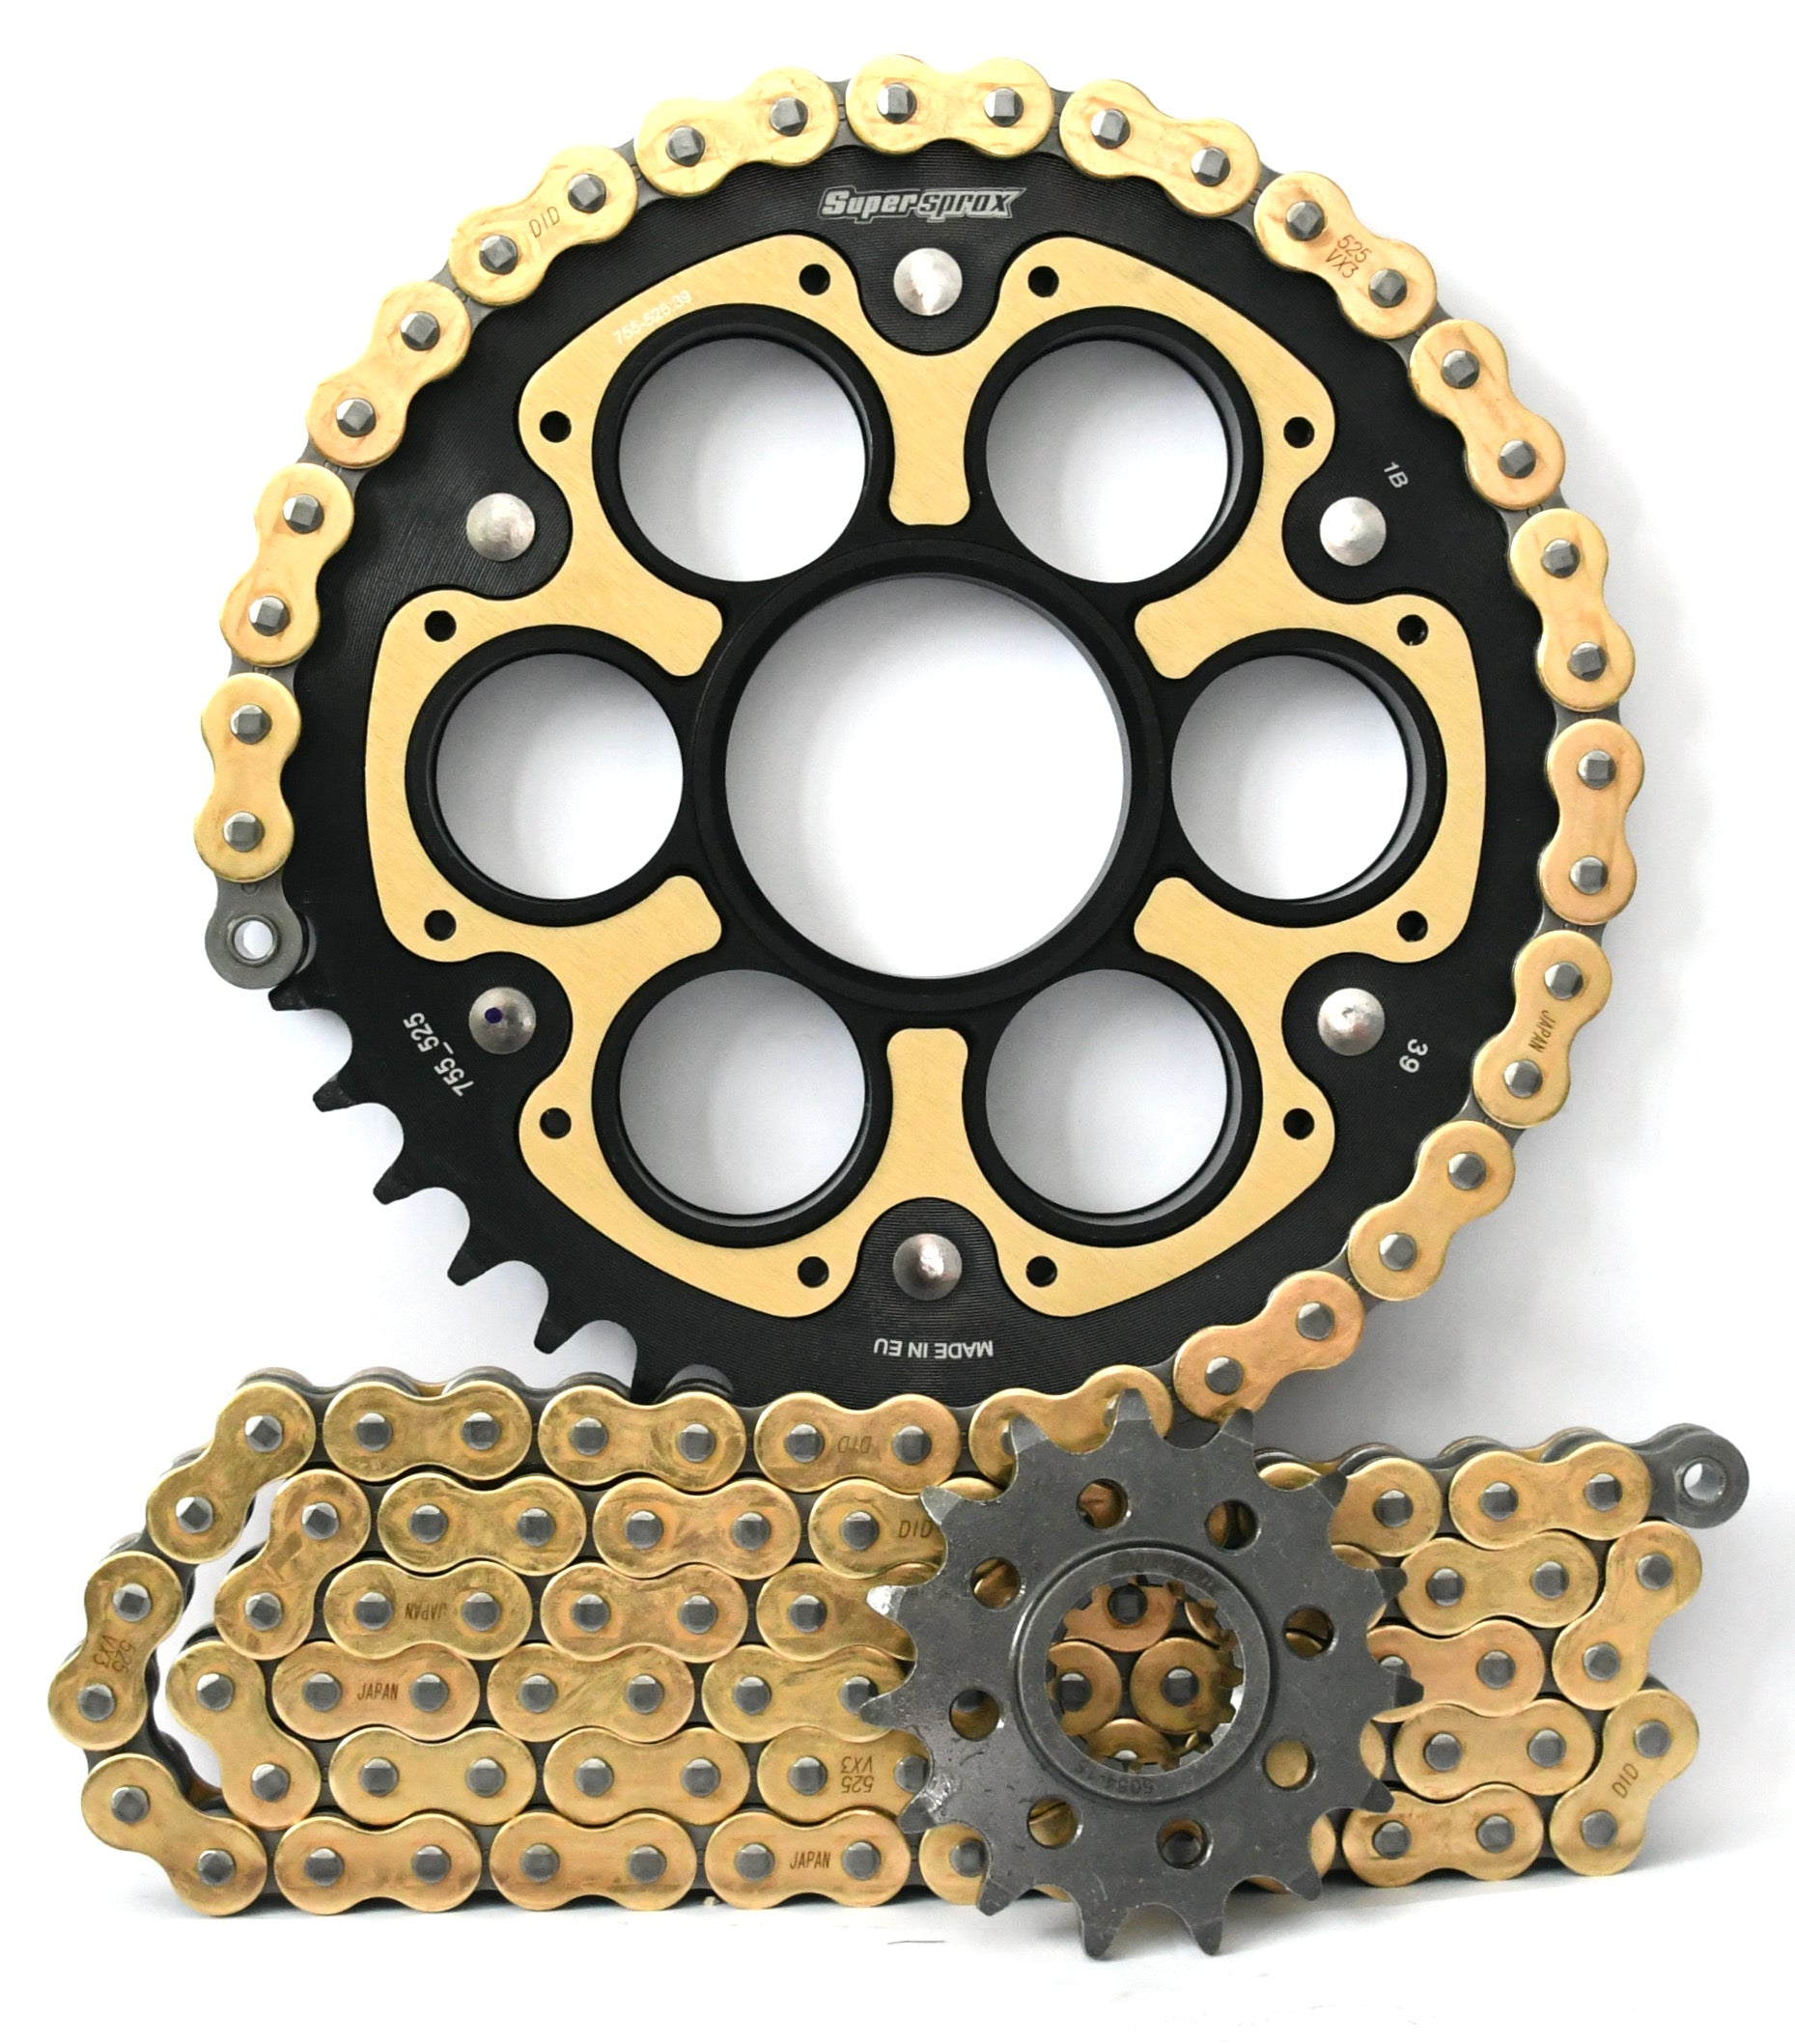 Supersprox Chain & Sprocket Kit for Ducati Panigale V2 - Choose Your Gearing - 0